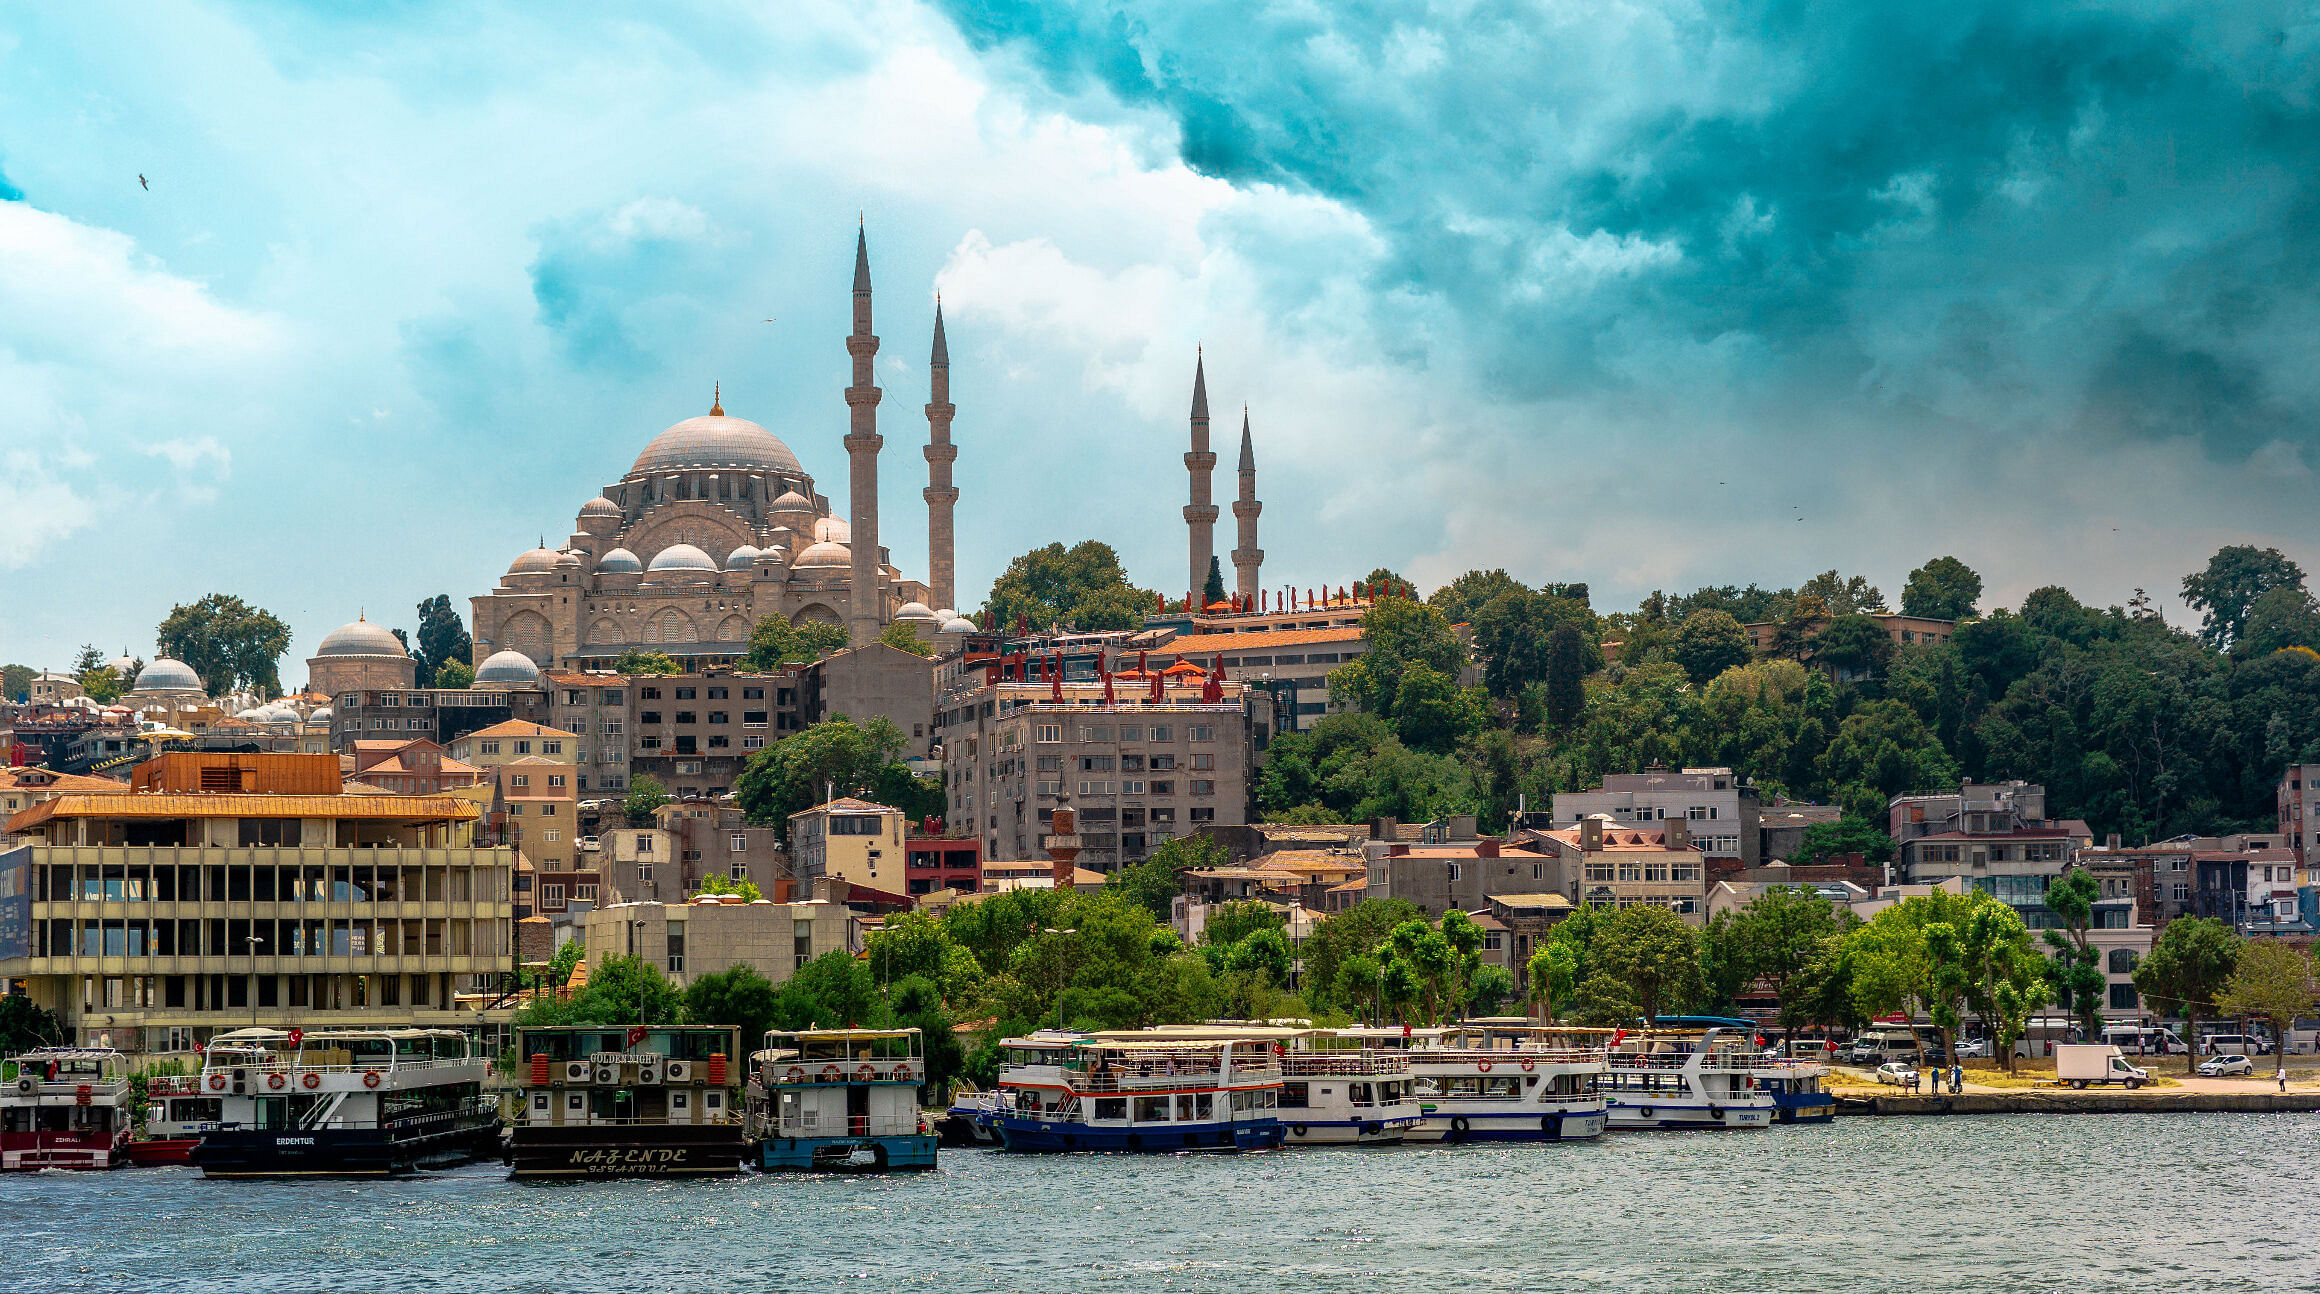 Istanbul Turkey from the river